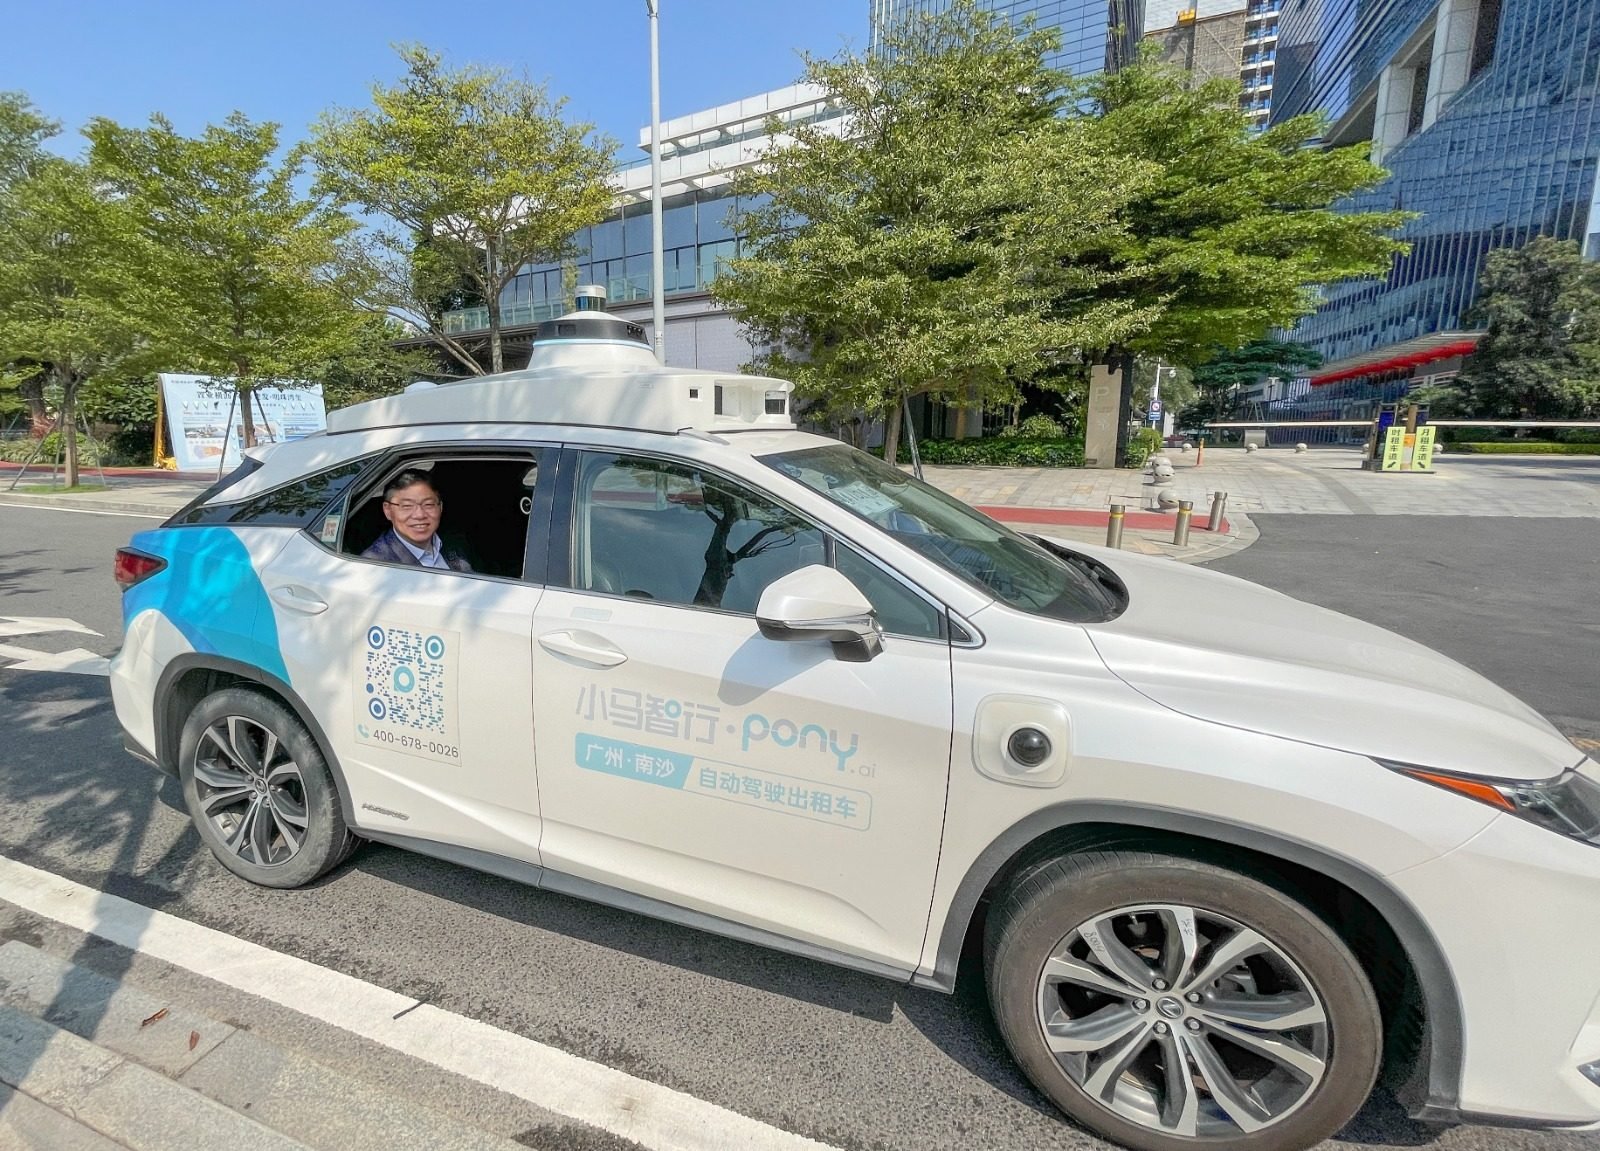 Secretary for Transport and Logistics Lam Sai-hung tries out a self-driving taxi in Guangzhou, Guangdong province, last September. Photo: ISD